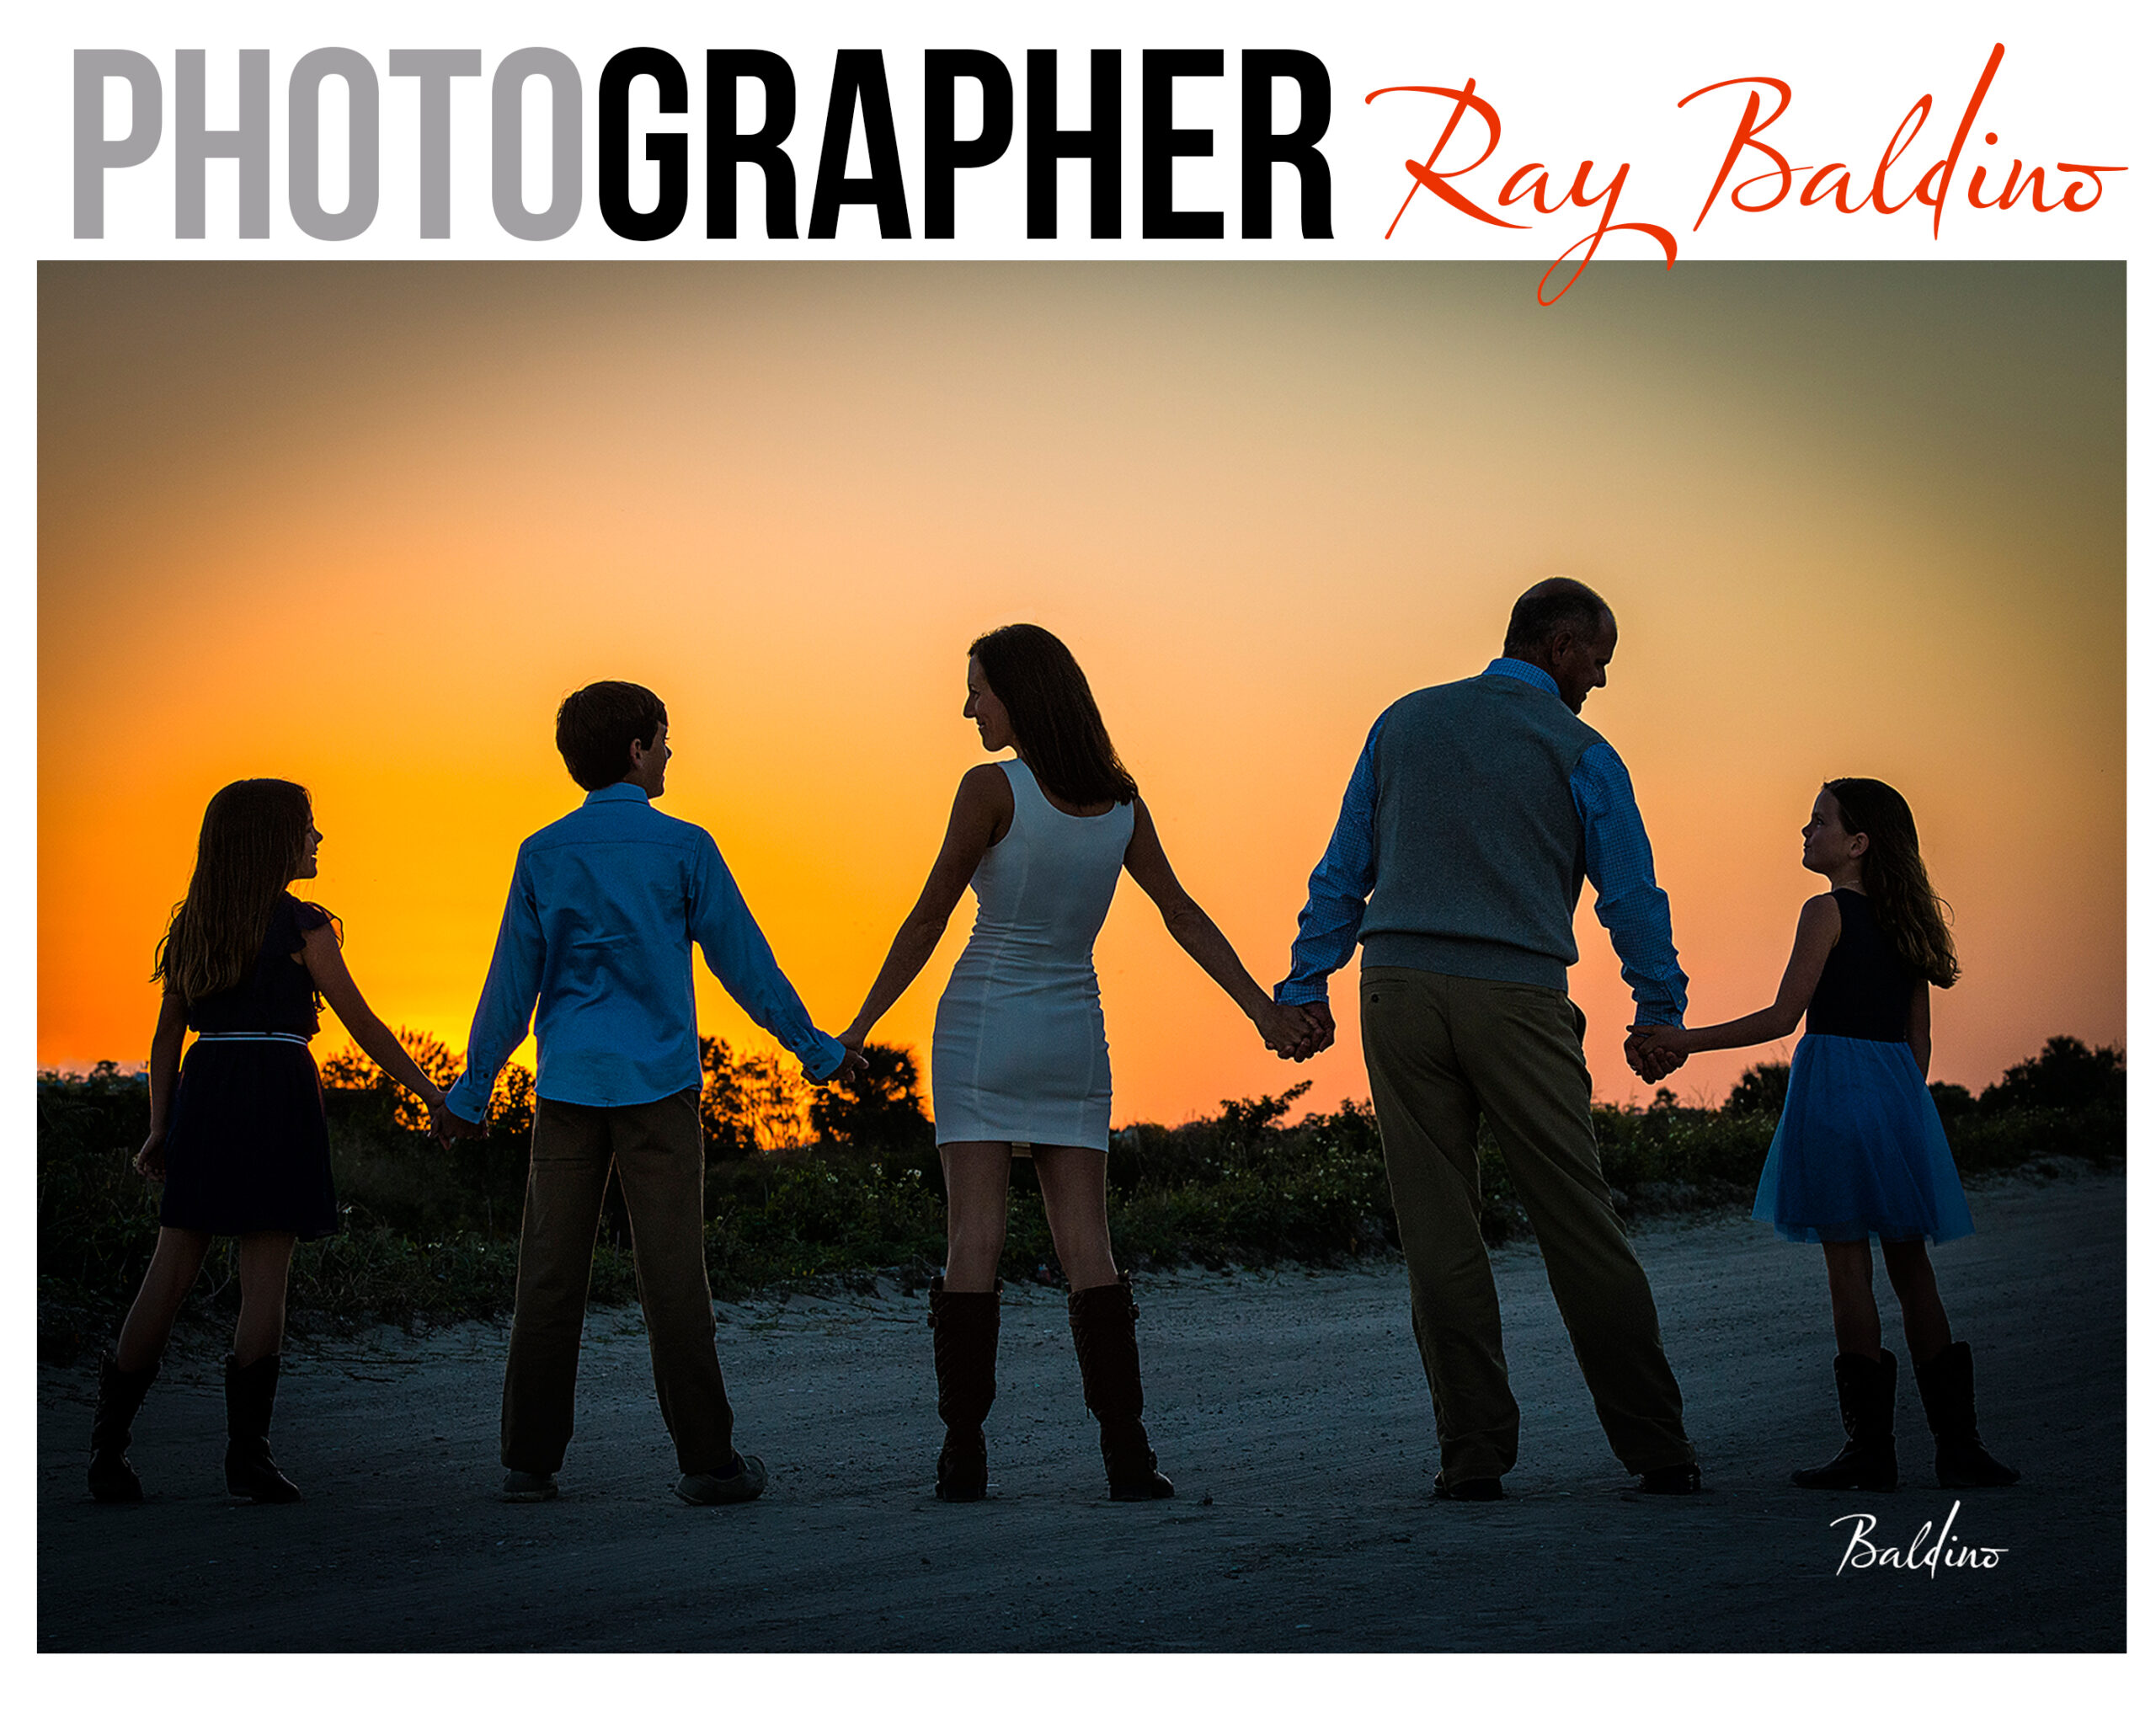 This_is_a_portrait_of_a-family_holding_hands_and_looking_into_the_sunset